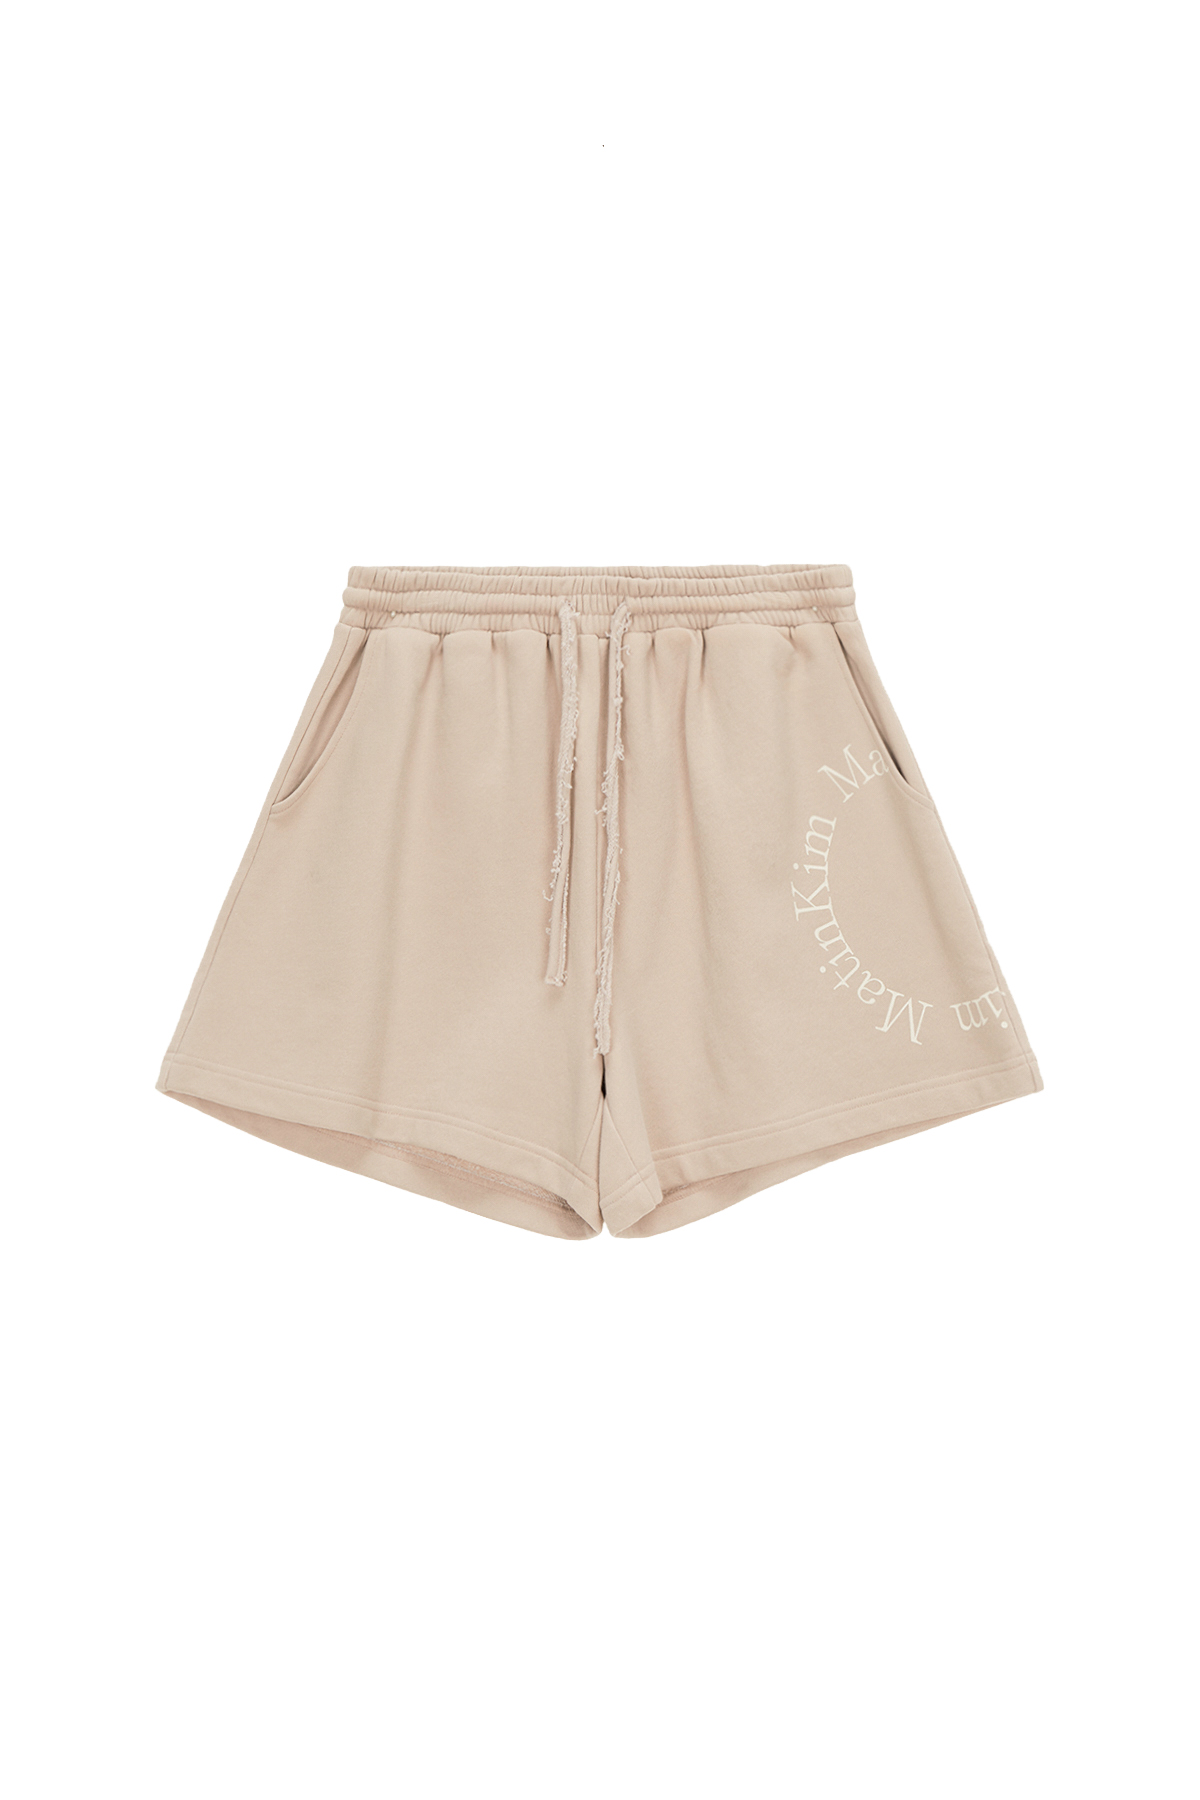 MATIN SOLID LOGO SHORTS IN BEIGE